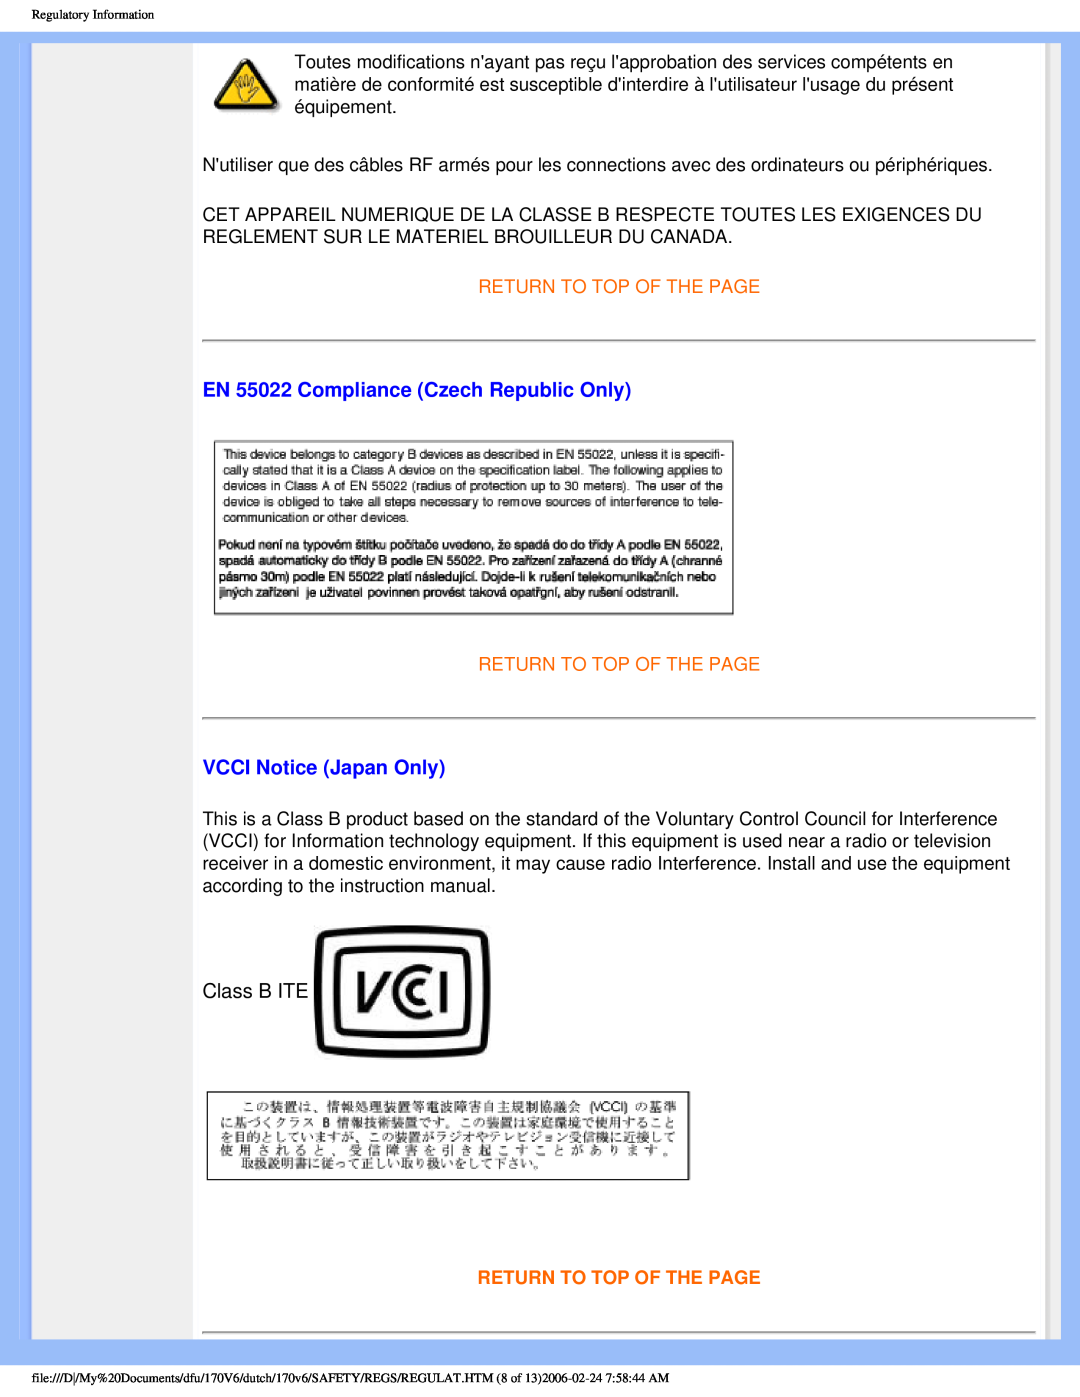 Philips 170V6 user manual EN 55022 Compliance Czech Republic Only, VCCI Notice Japan Only, Return To Top Of The Page 